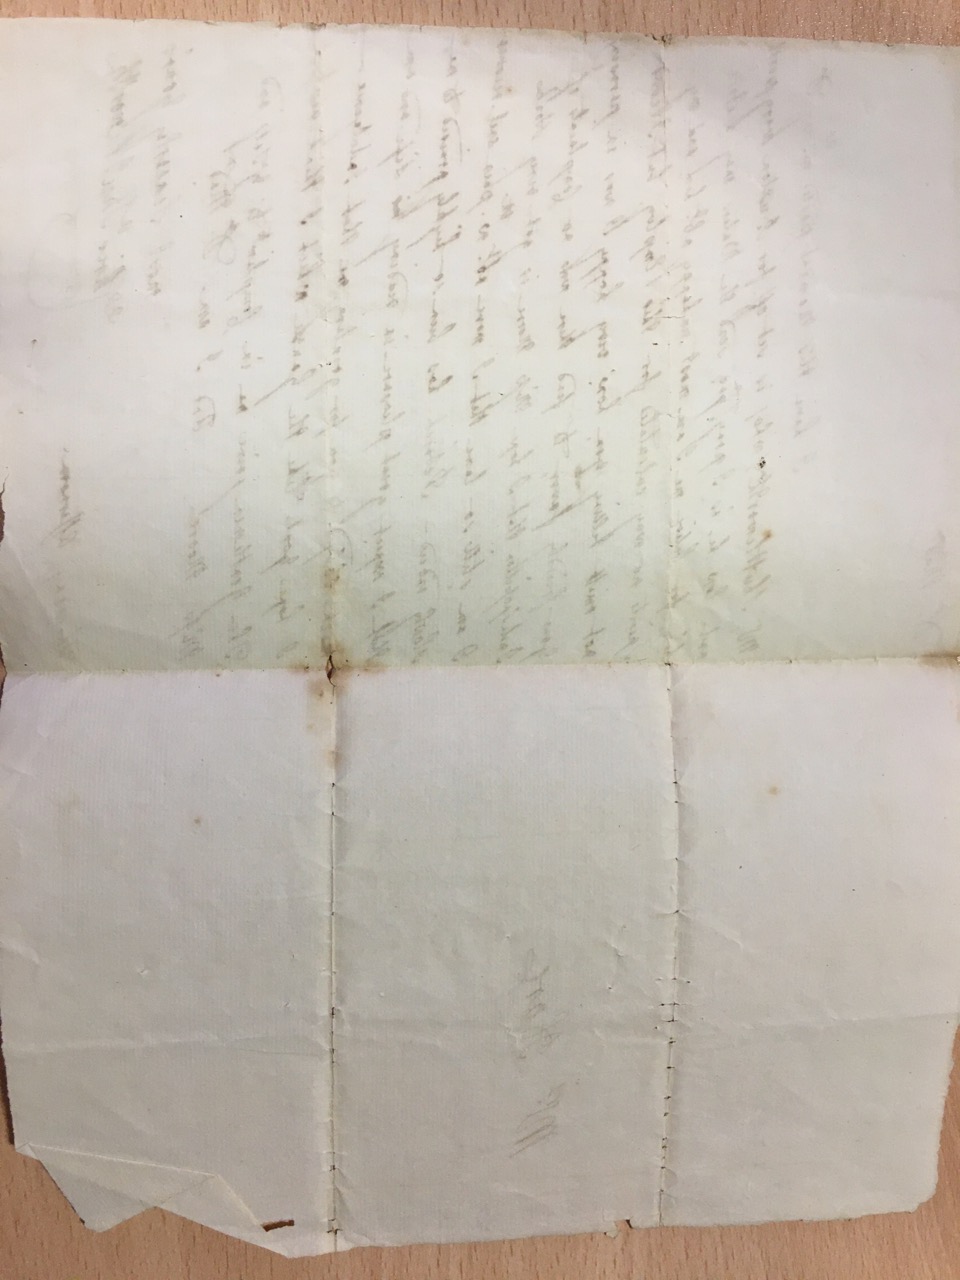 Image #2 of letter: Christiana Shuttleworth to Ann Hare, undated